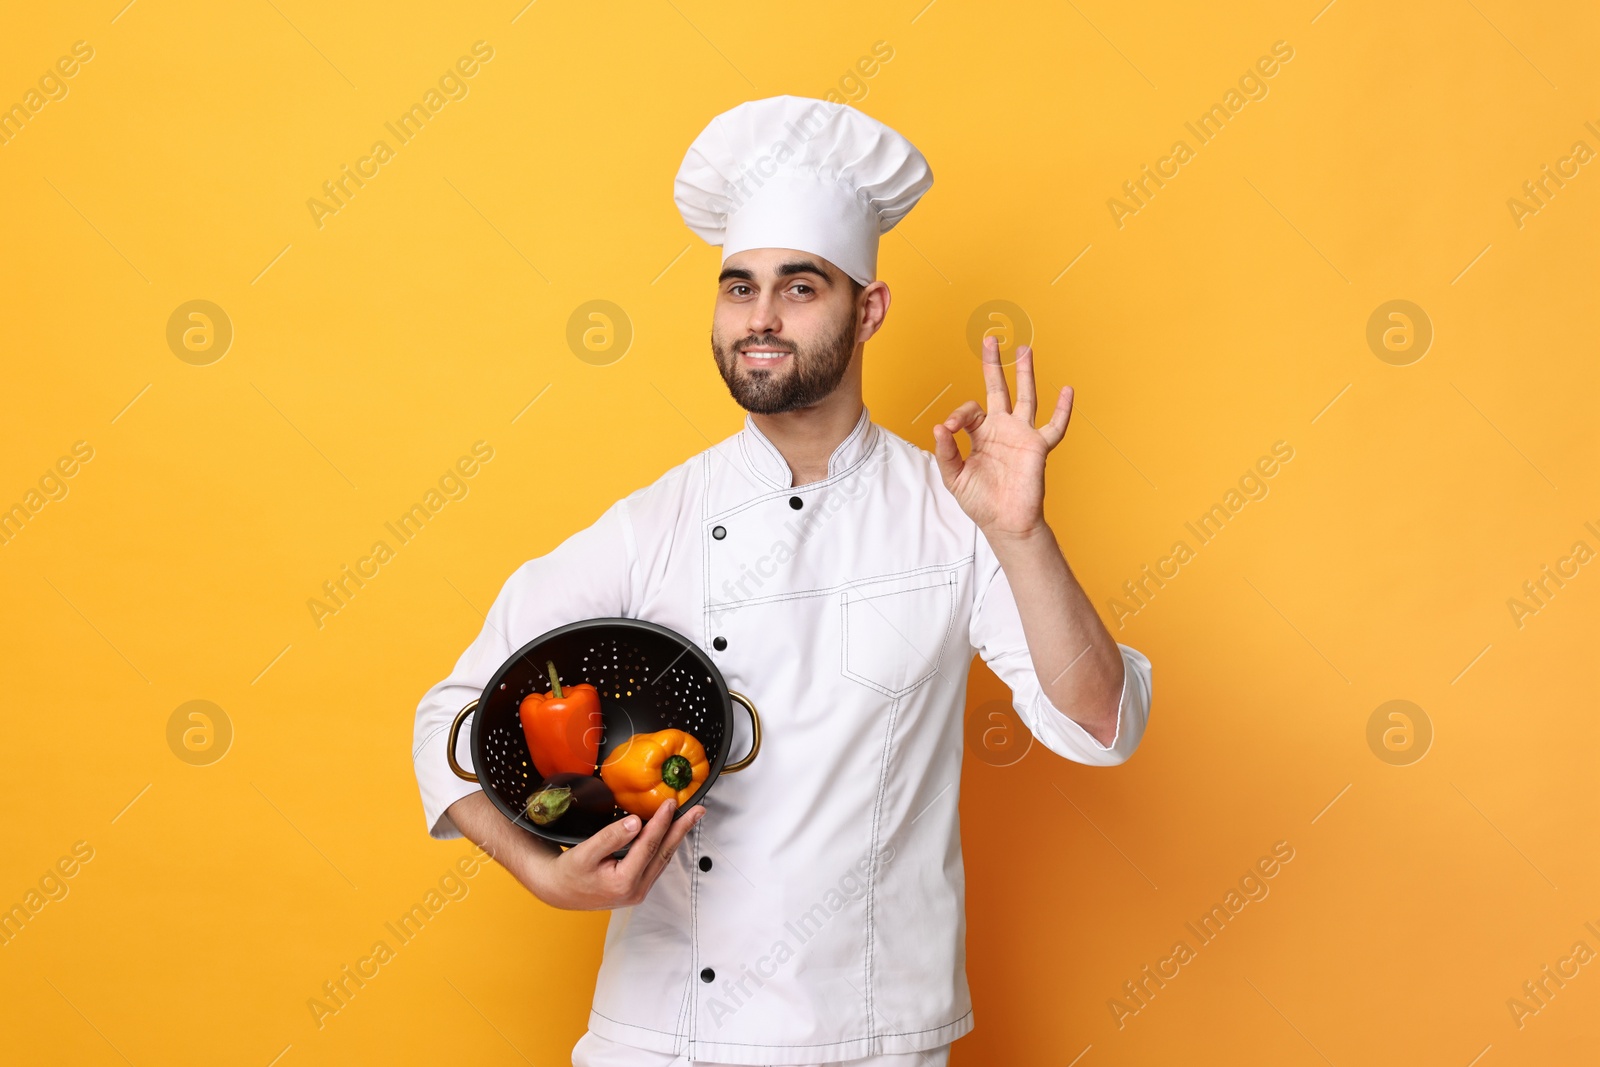 Photo of Professional chef holding colander with vegetables and showing OK gesture on yellow background